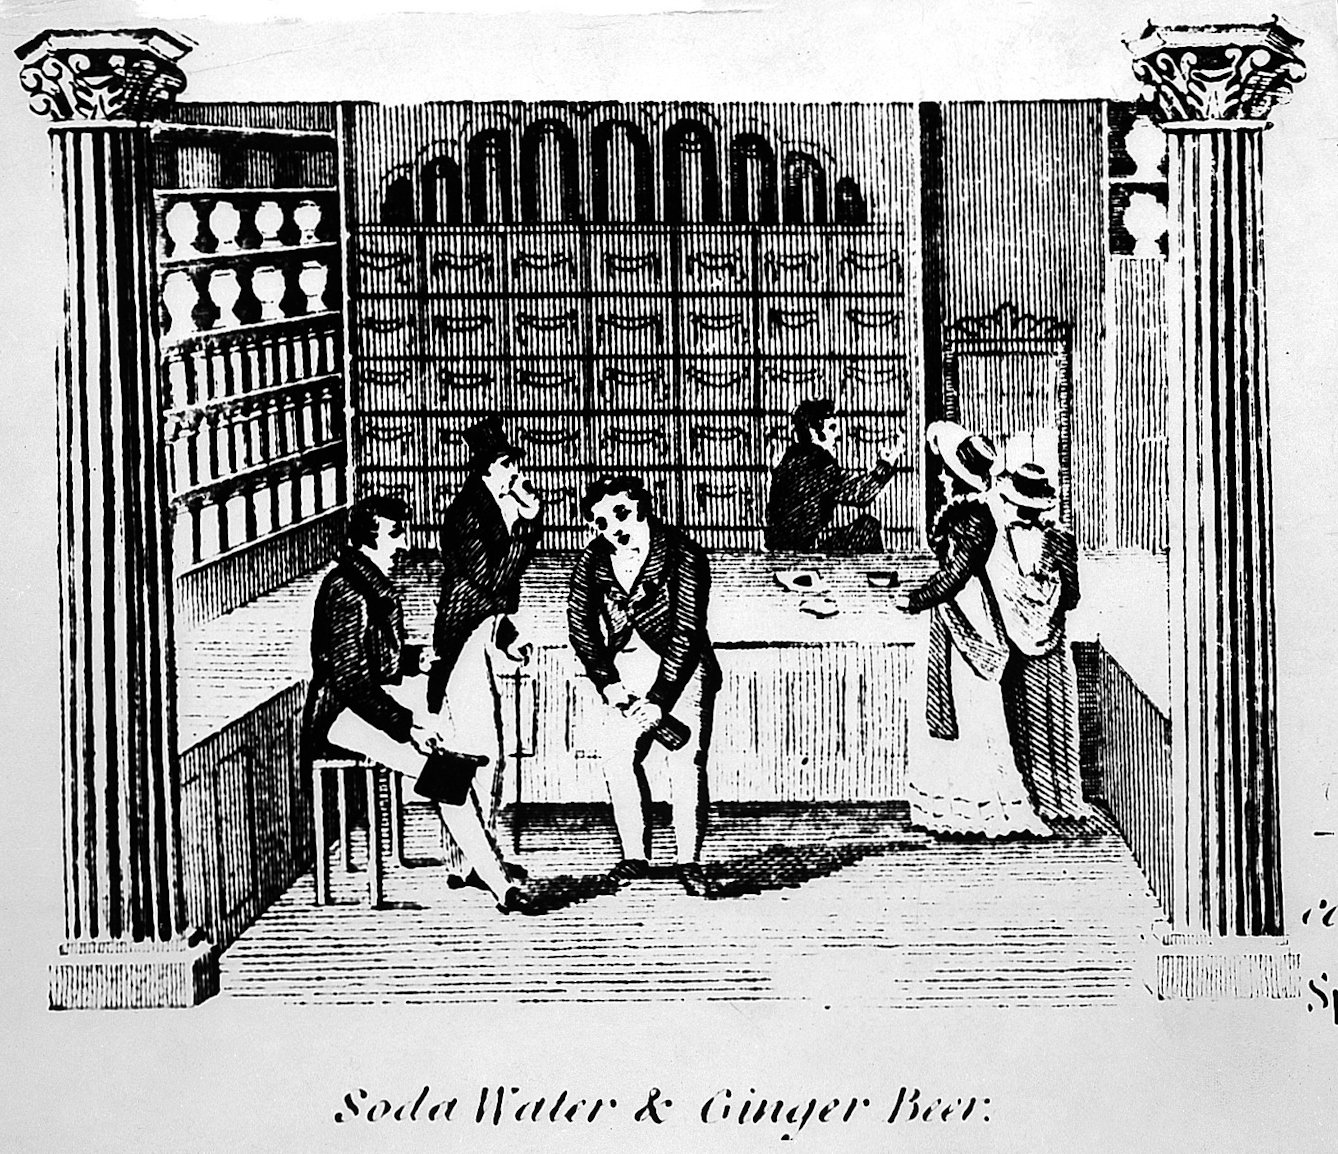 The inside of a pharmacists shop selling soda water and ginger beer. three male customers appear to be drinking whilst two women stand at the counter and a pharmacist in the background reaches for a drawer.